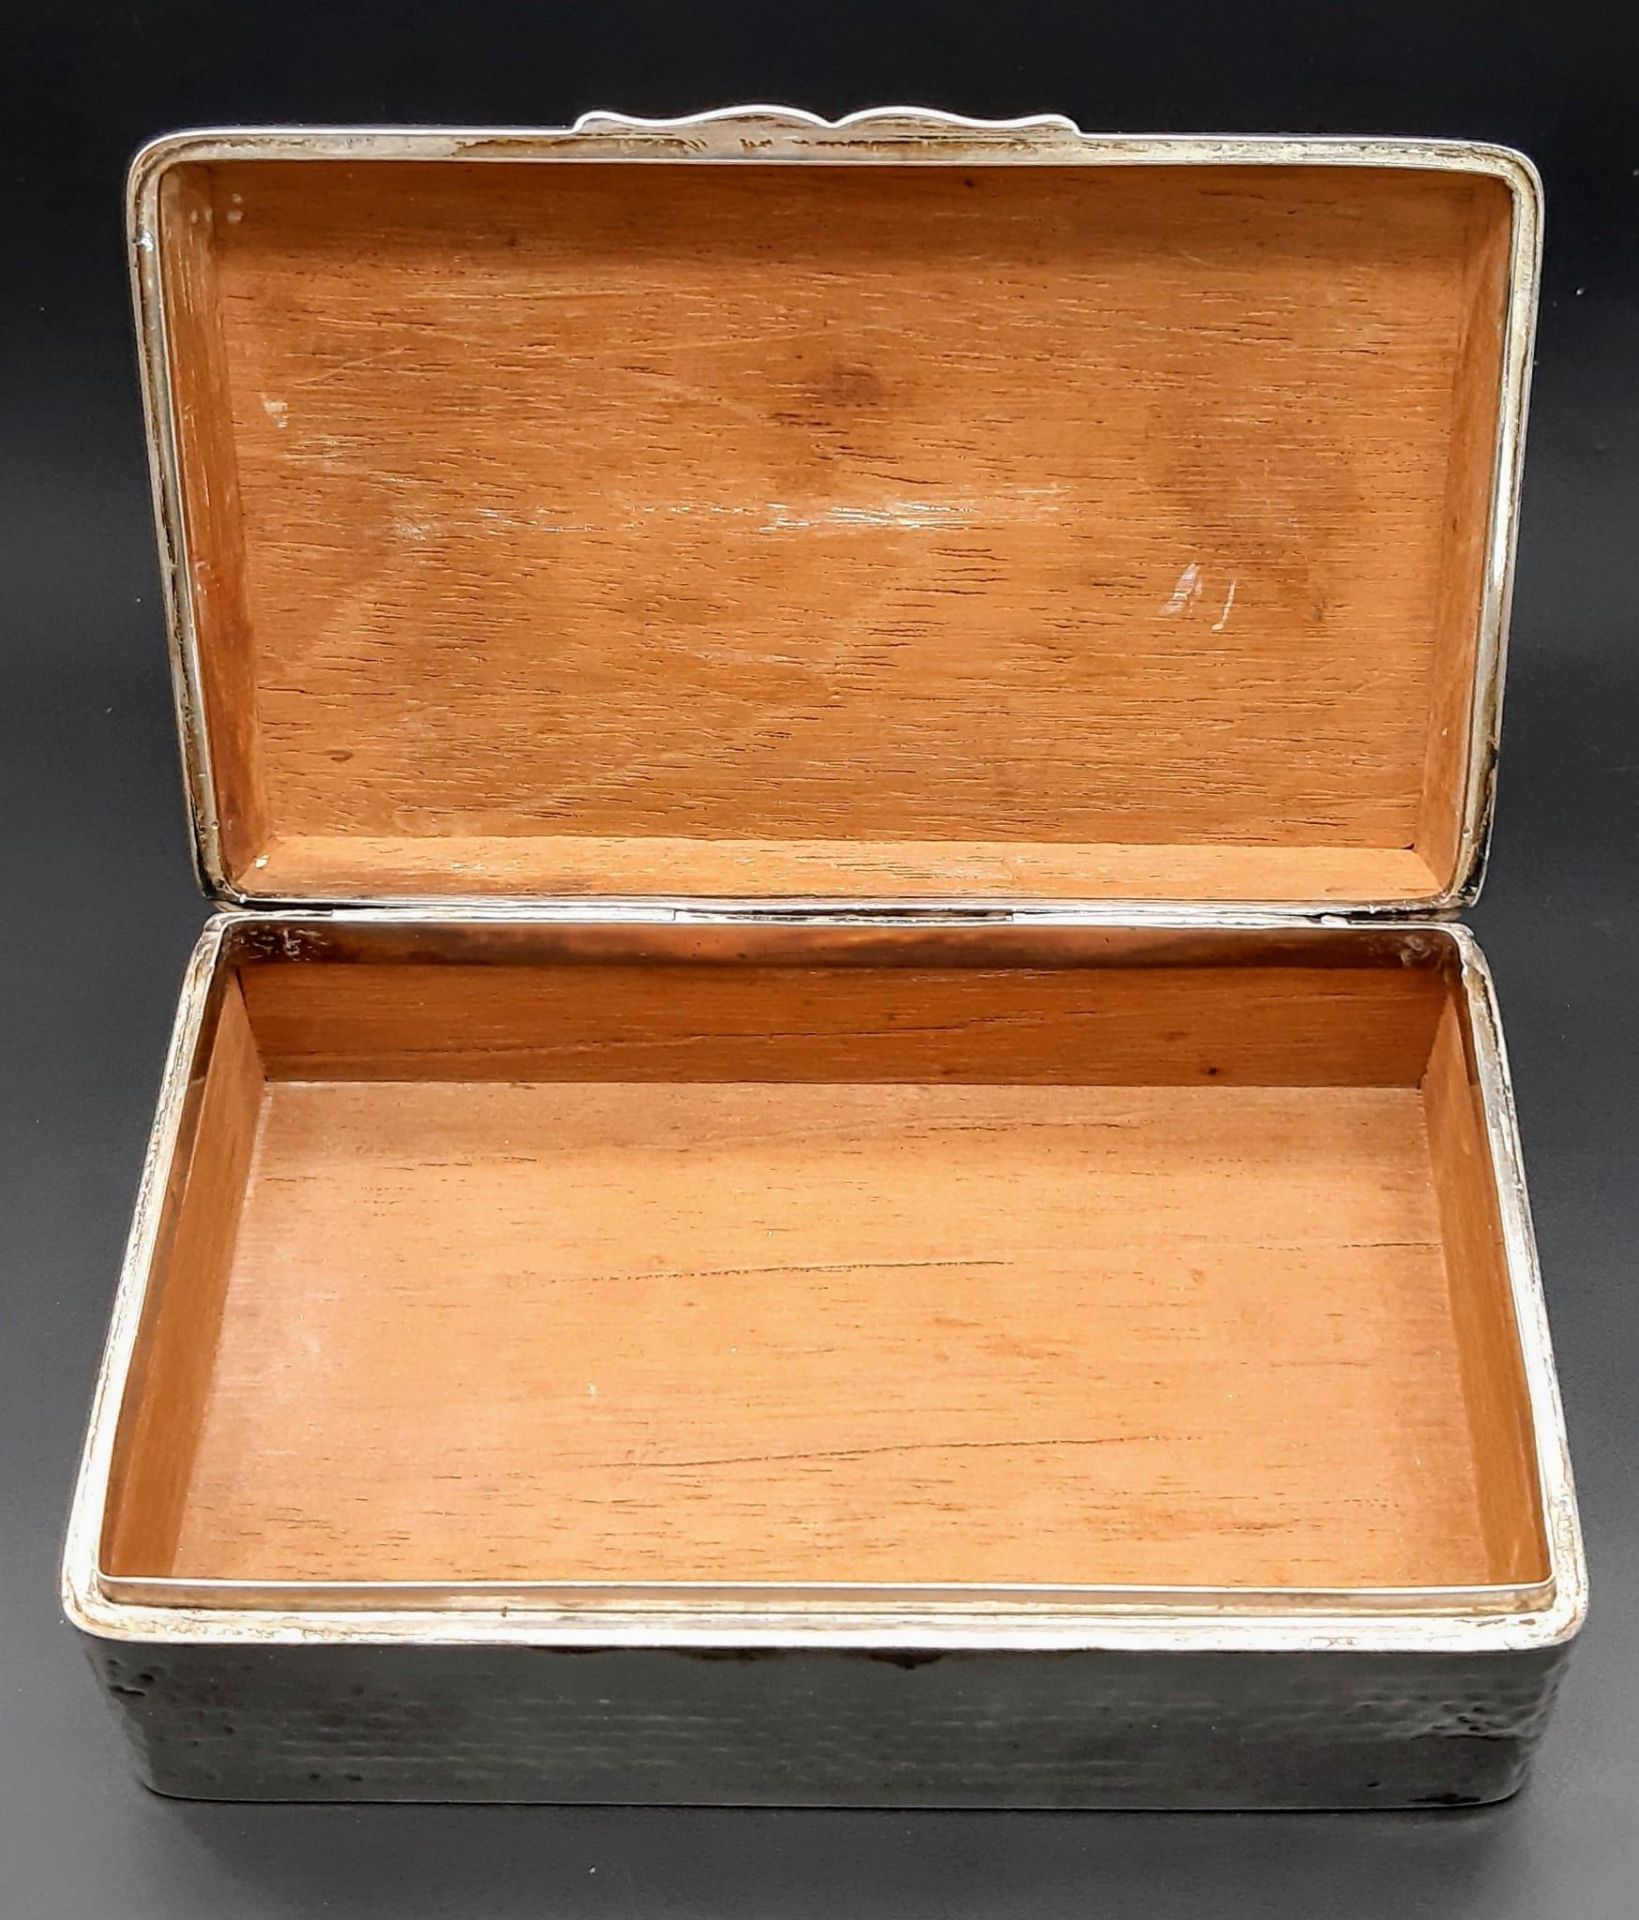 A Wonderful Antique Sterling Silver Cigarette, Cheroot Case. Dimpled silver exterior with a good - Image 5 of 8